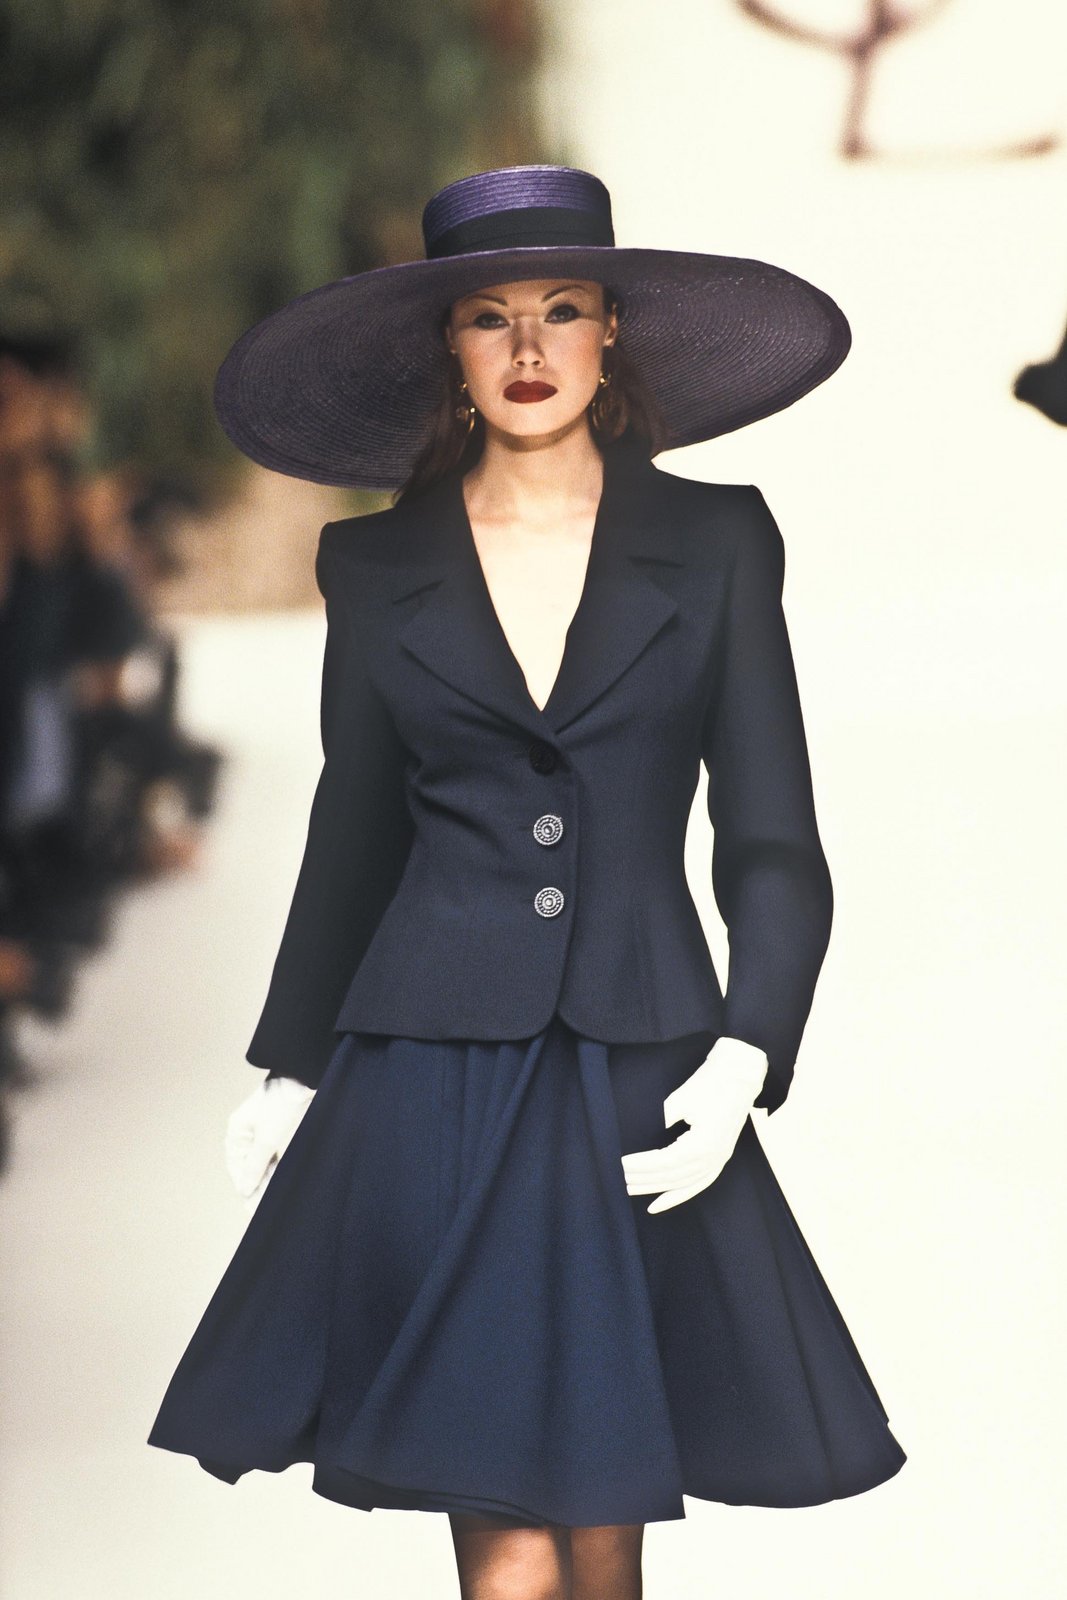 Fashion Classic: Yves Saint Laurent Spring/Summer 1995 | Page 2 ...